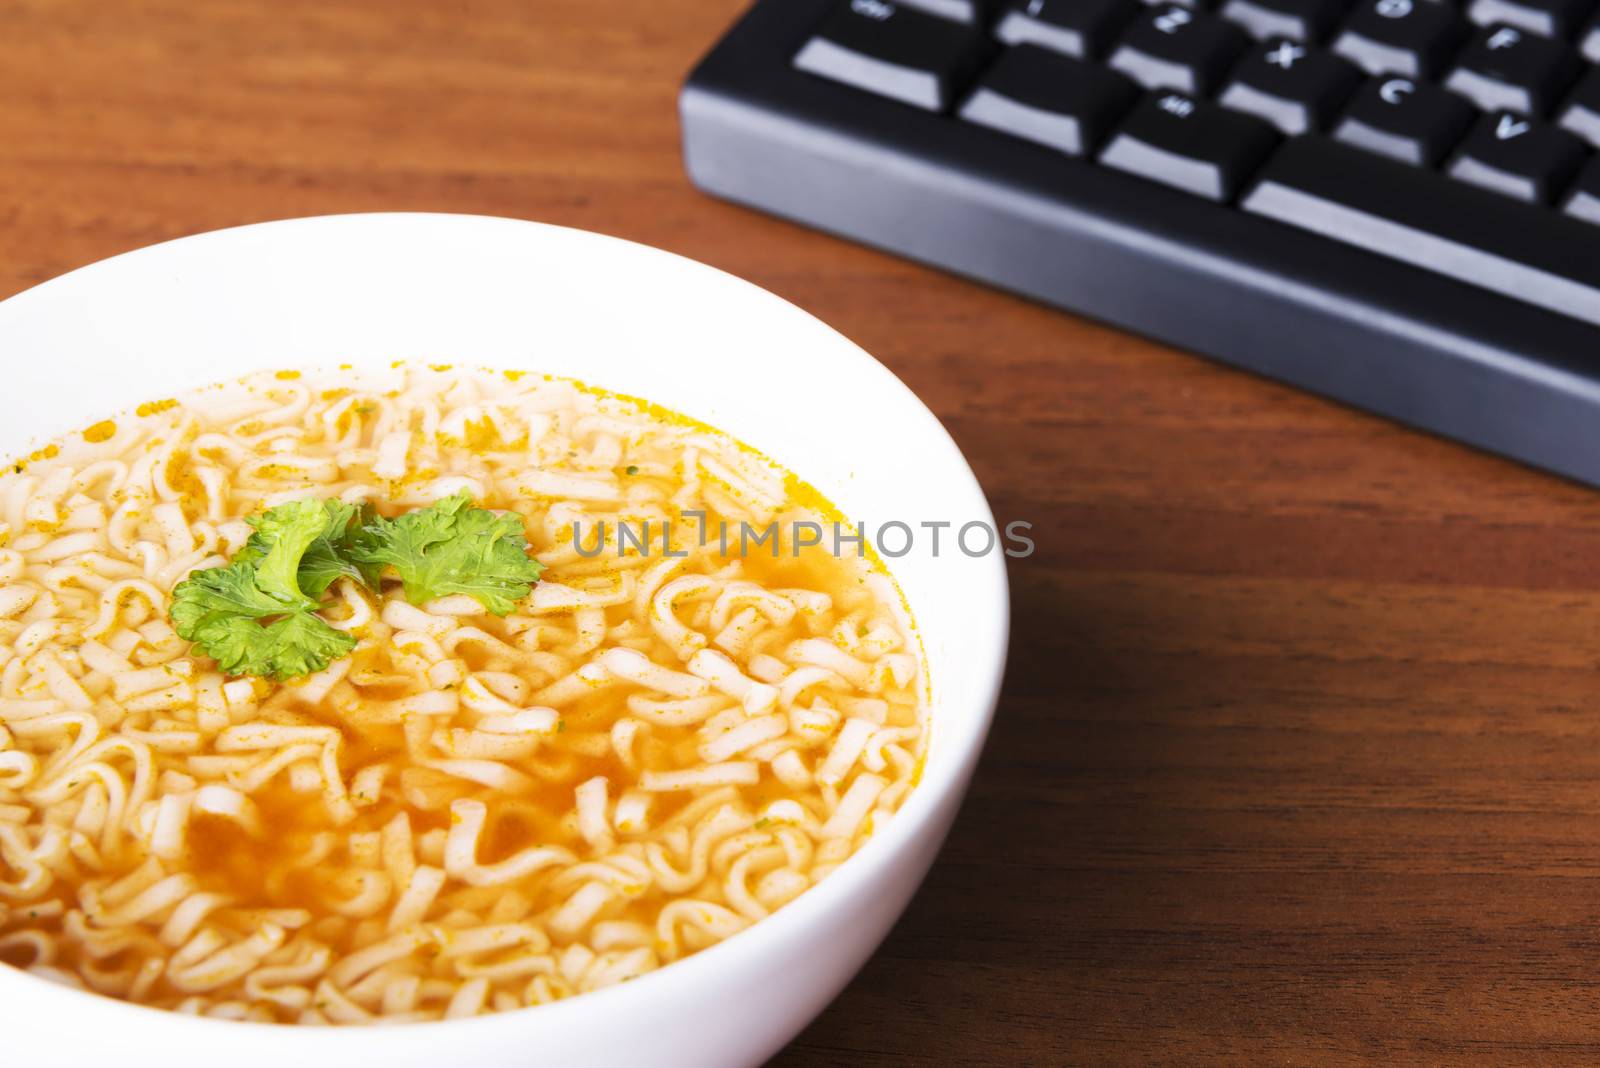 Chinese, vegetable, pasta soup next to keyboard. by BDS